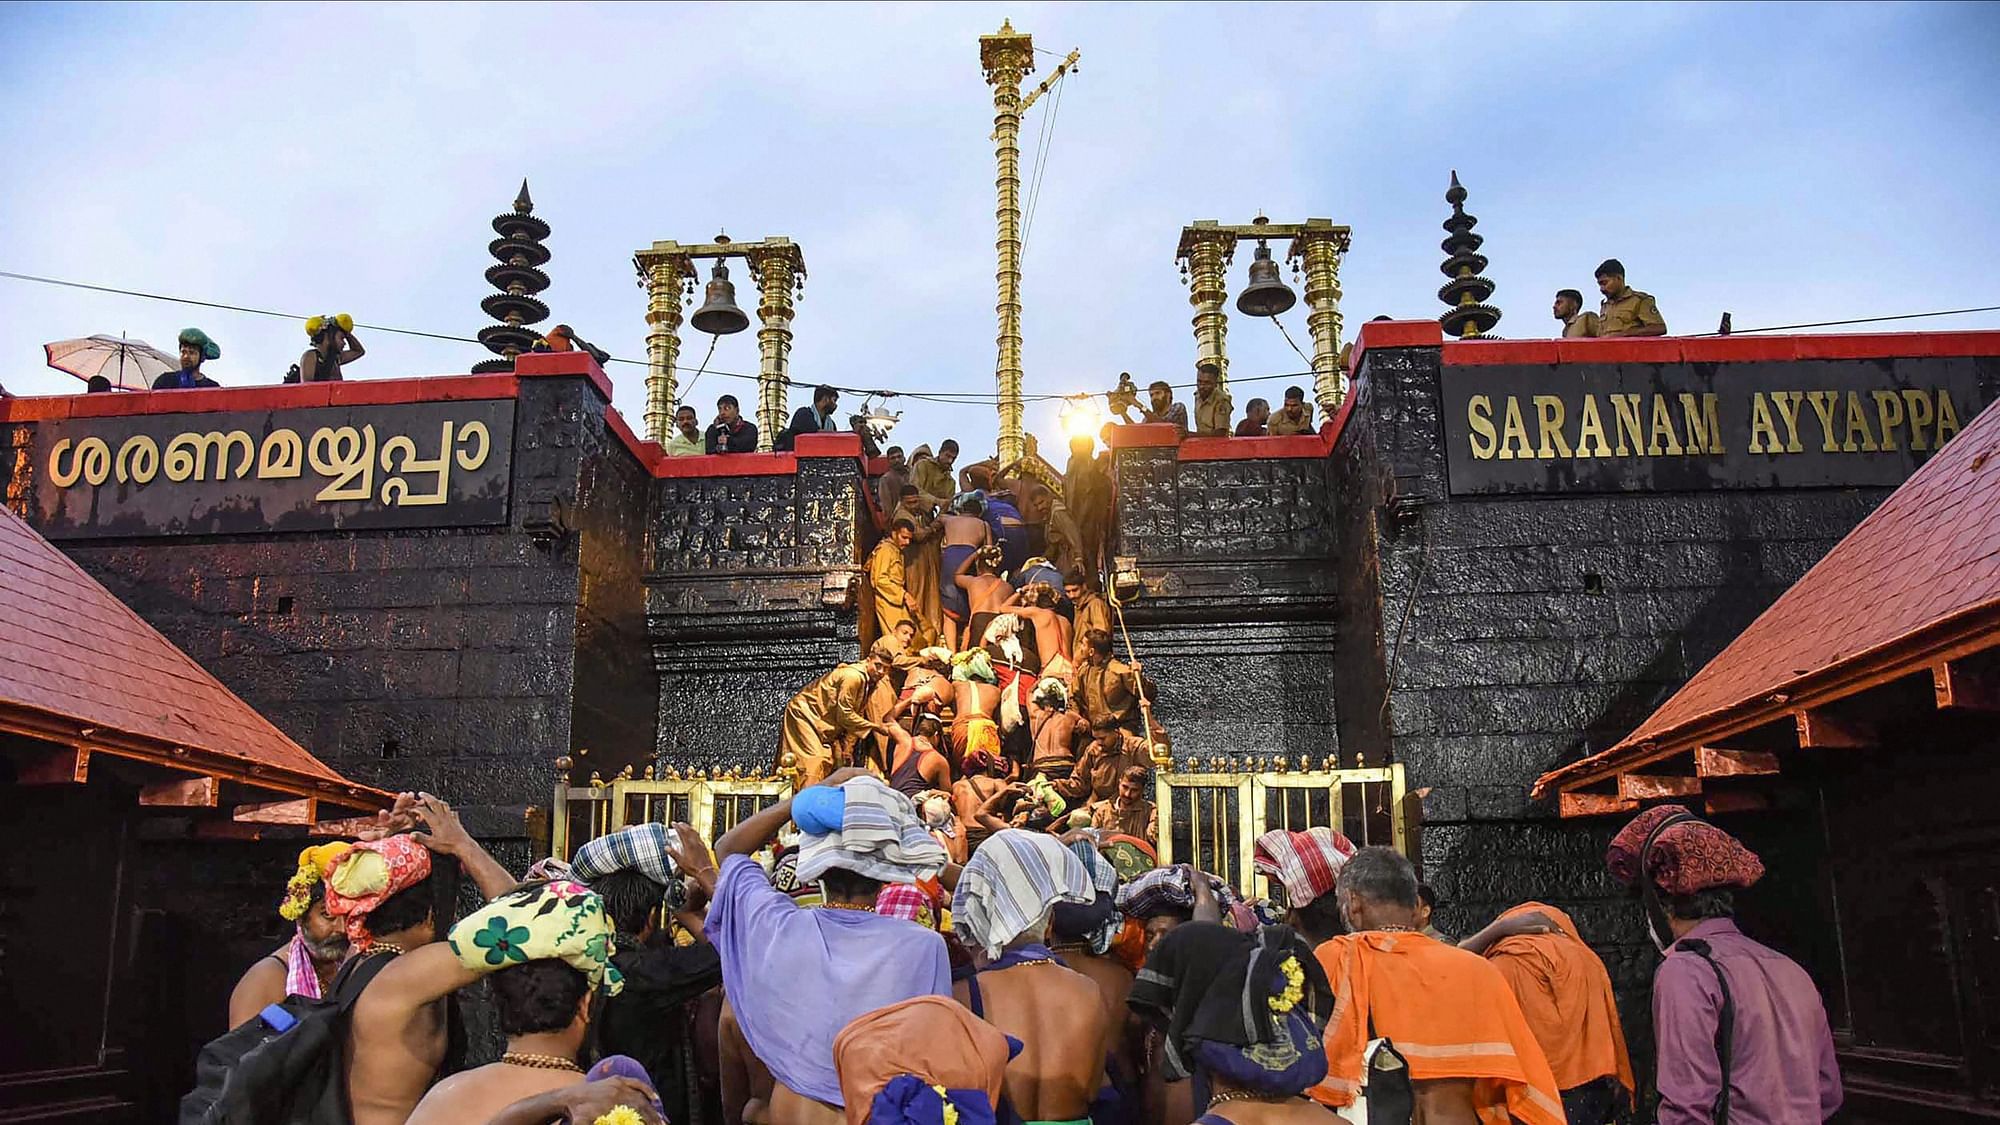 The Supreme Court decided to refer the Sabarimala case to a larger, seven-judge bench.